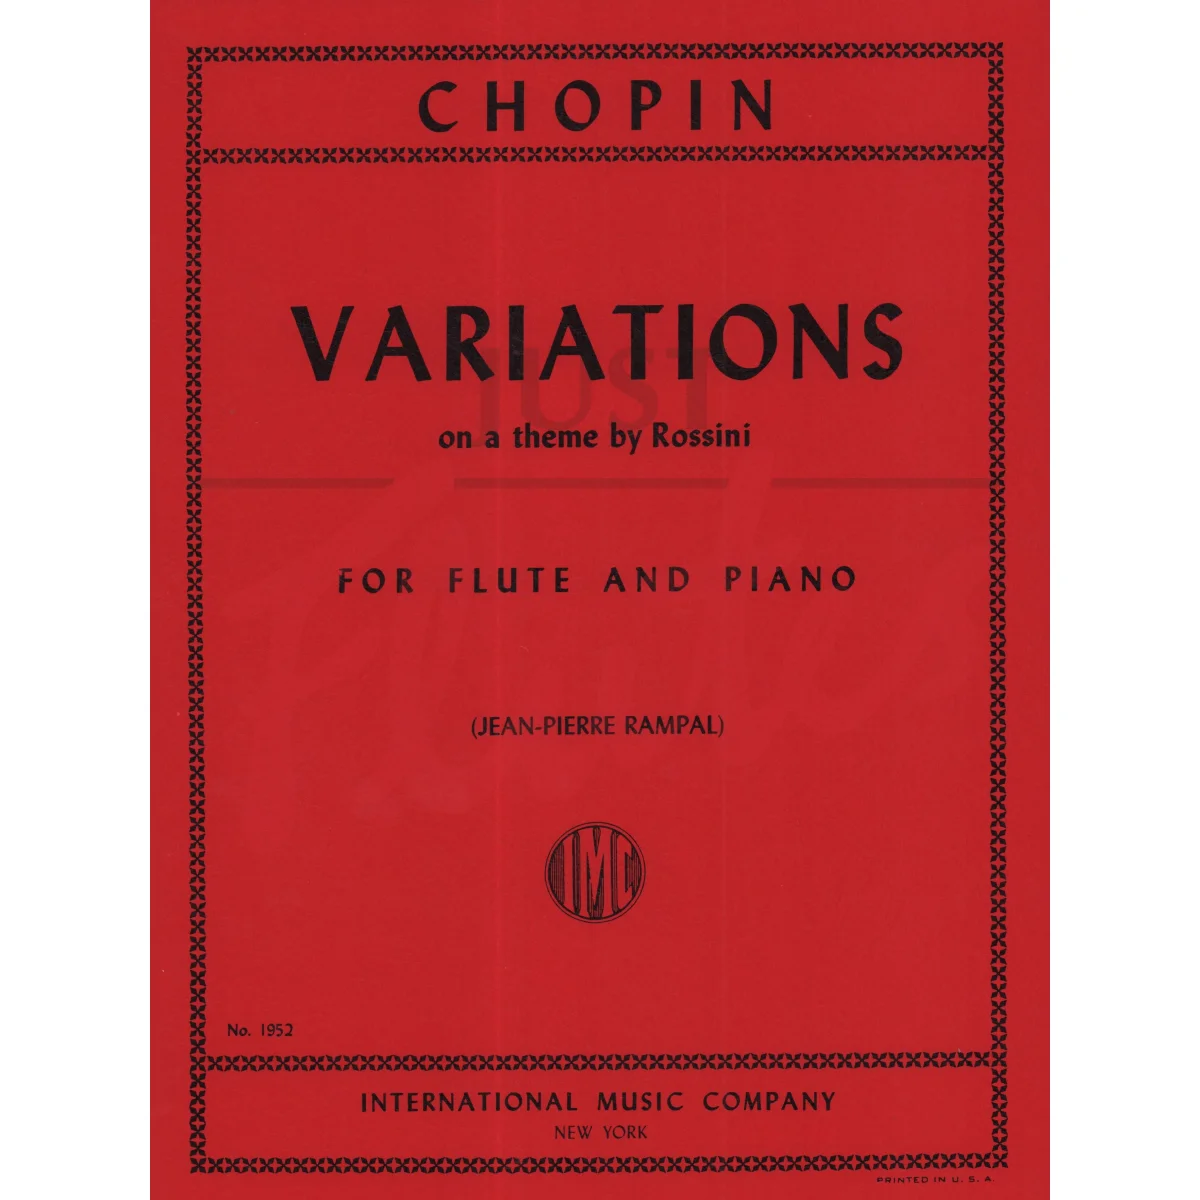 Variations on a Theme by Rossini for Flute and Piano